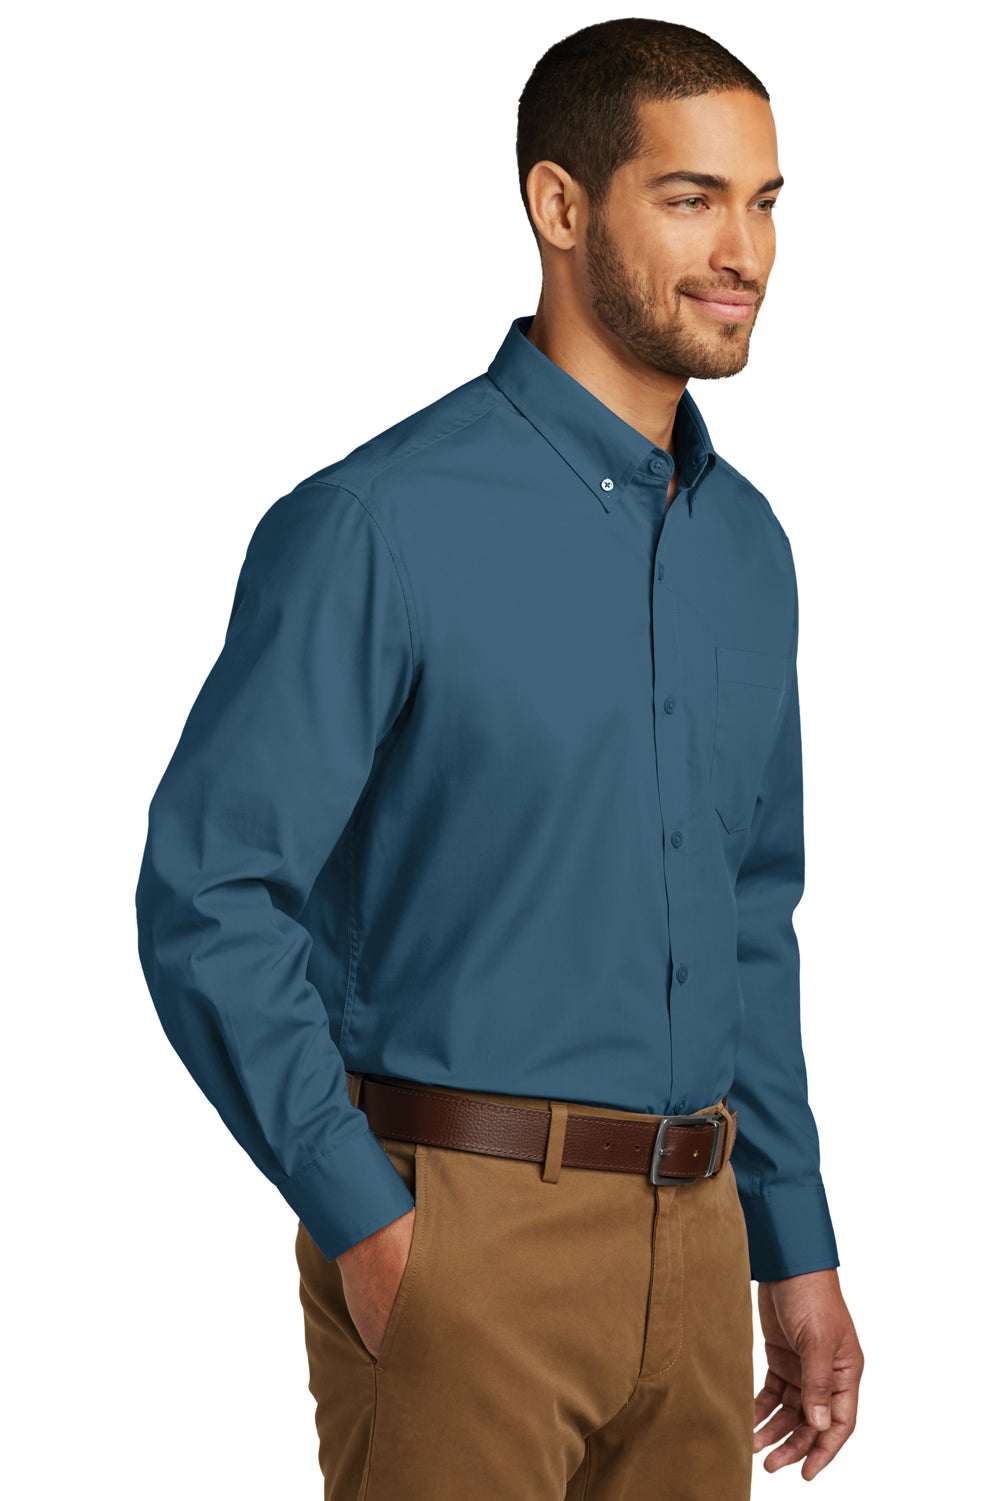 Port Authority W100/TW100 Carefree Stain Resistant Long Sleeve Button Down Shirt w/ Pocket Dusty Blue 3Q